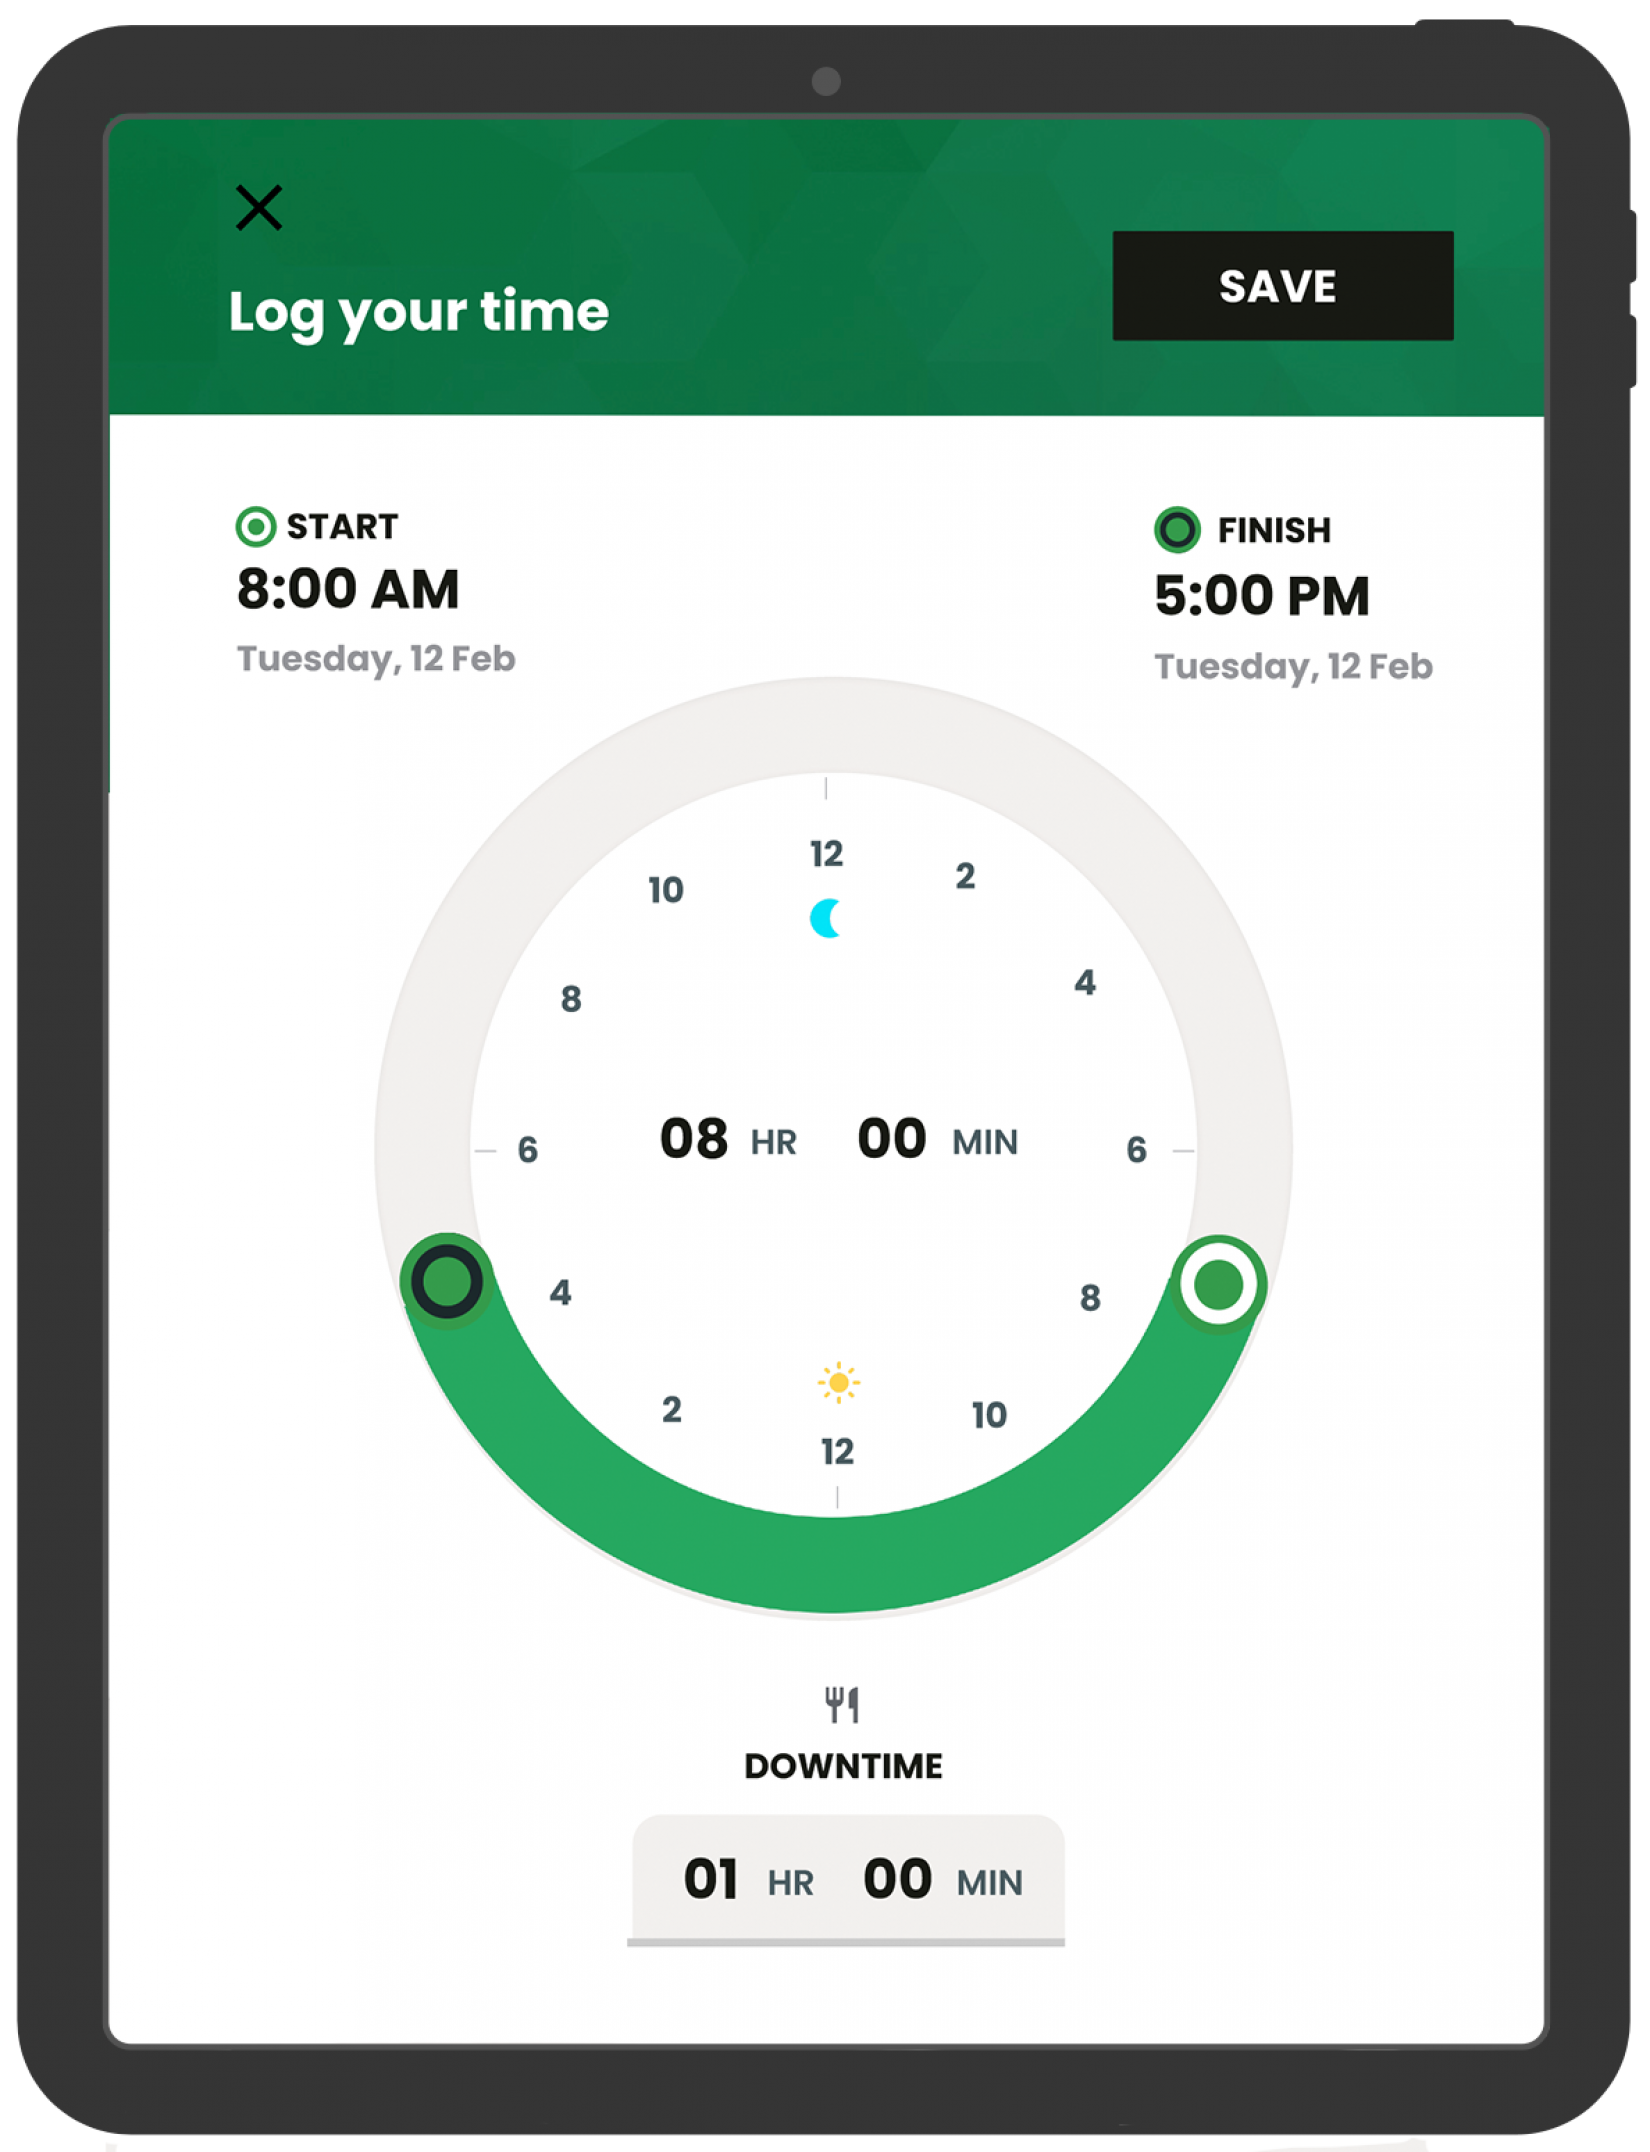 USER INTERFACE: Logging your time with Magnetize on an iPad.